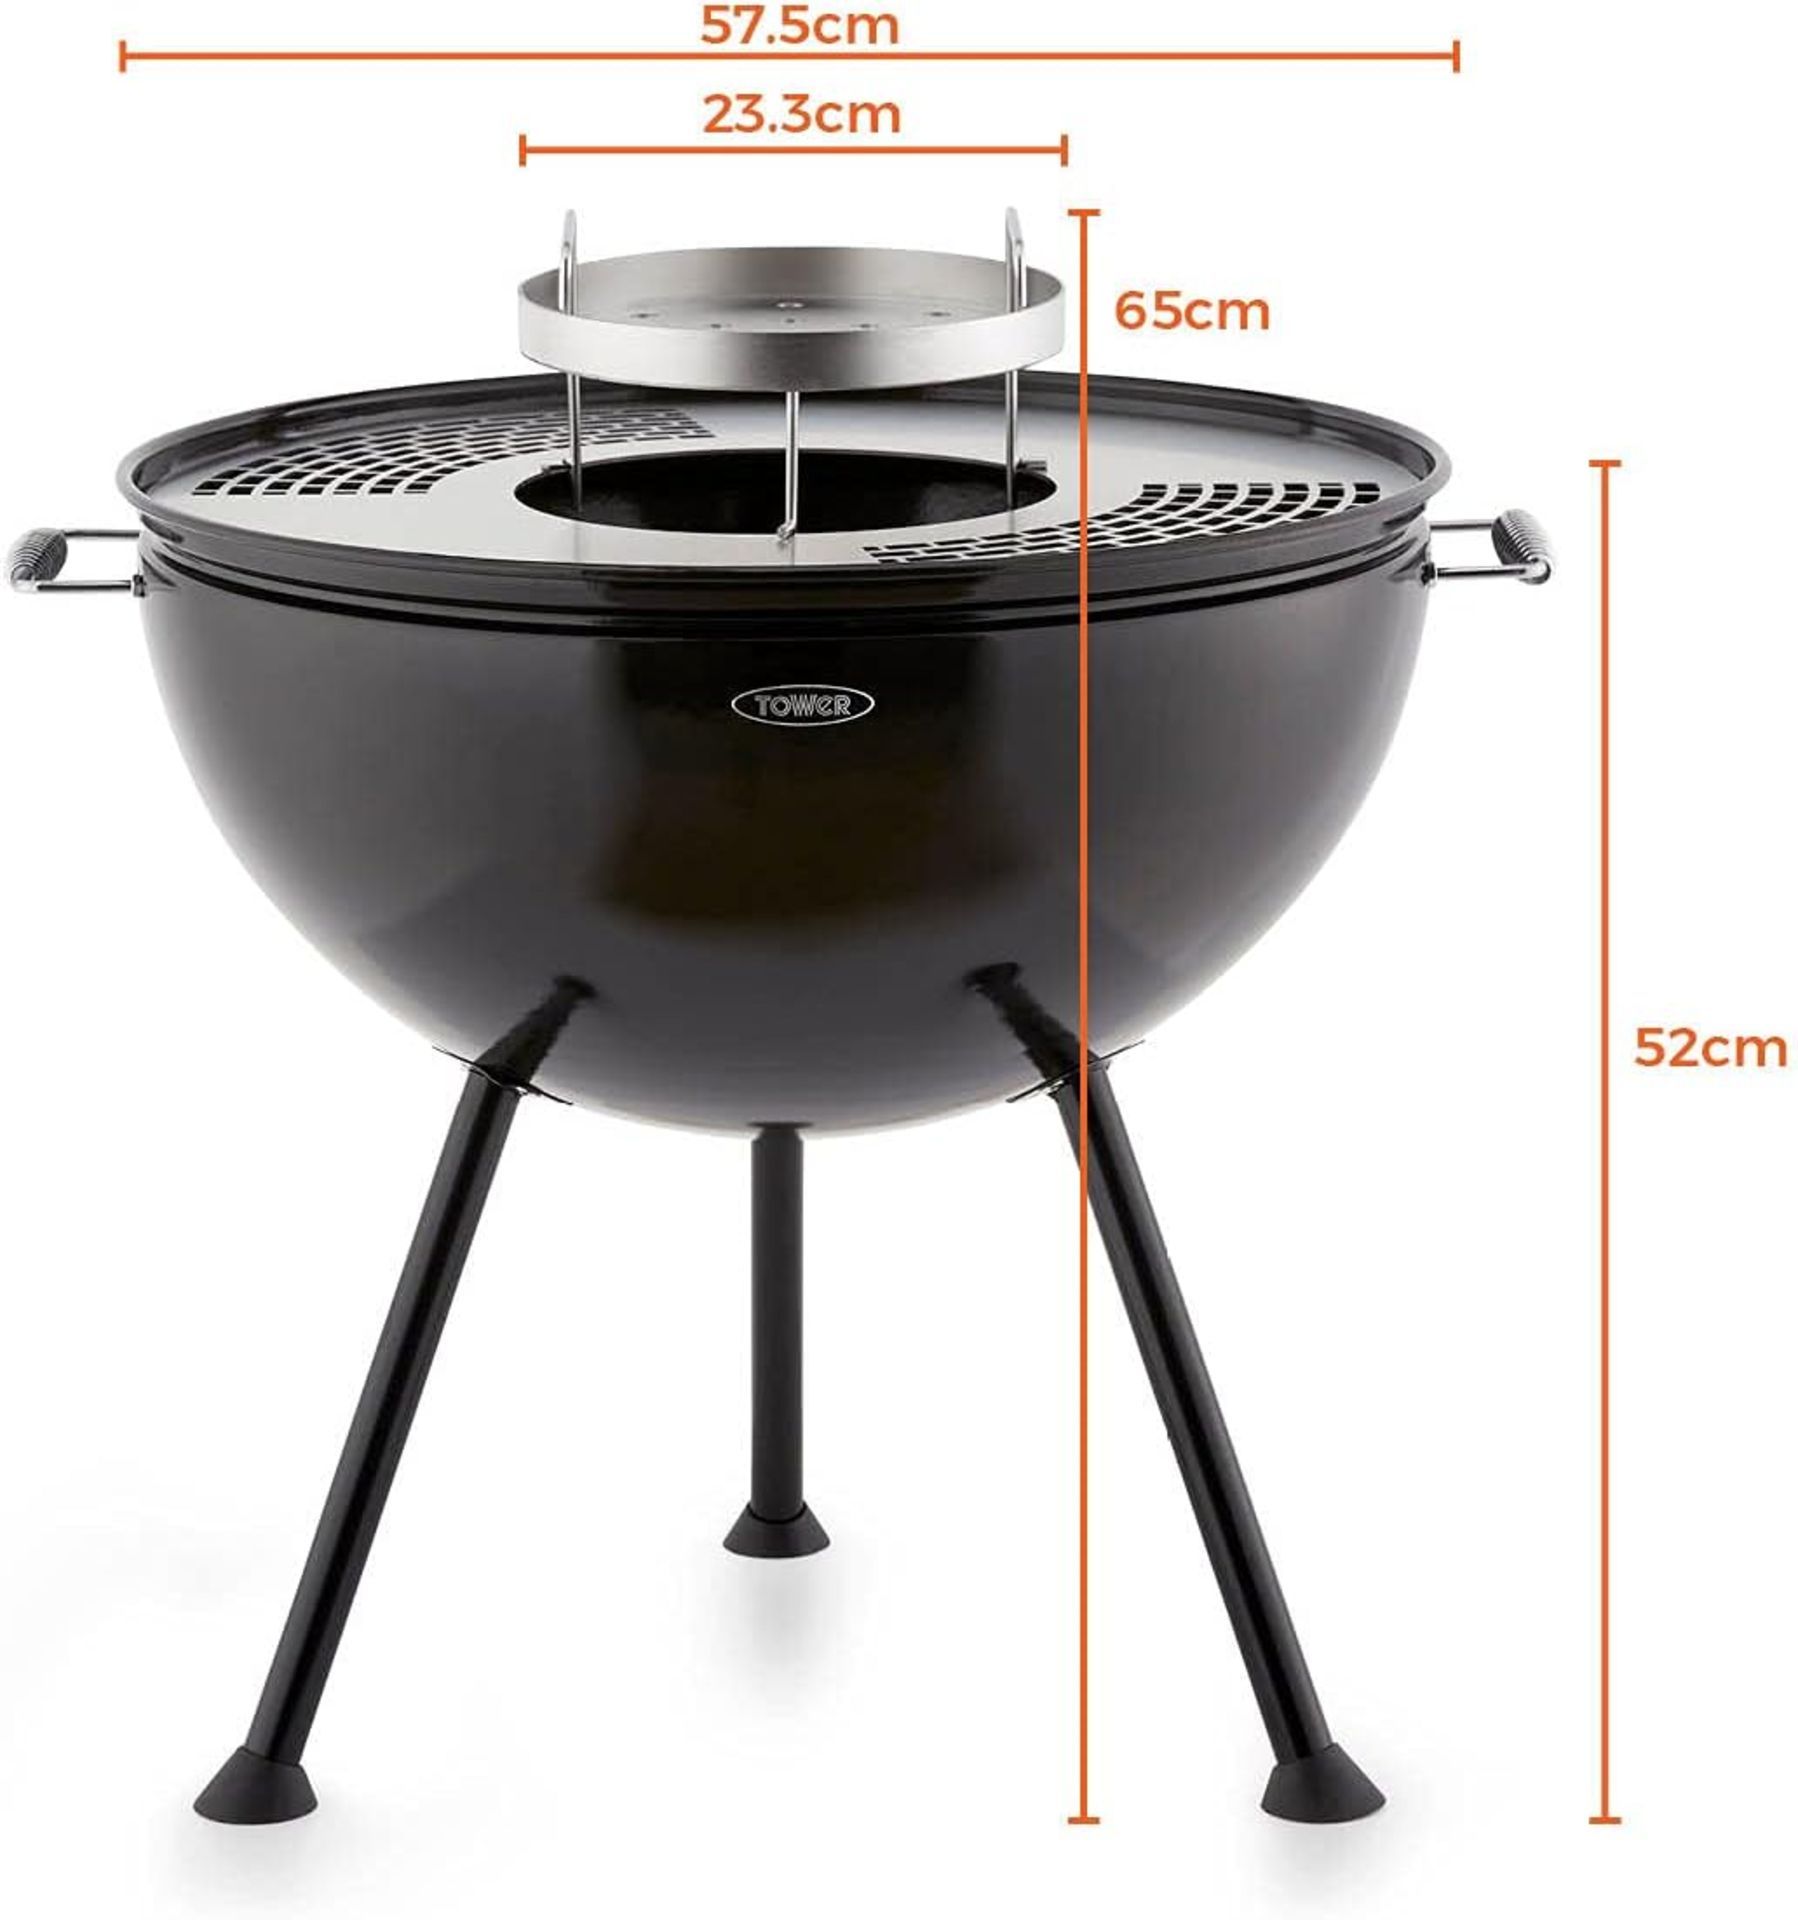 2x BRAND NEW Tower 2-in-1 Fire Pit and BBQ. RRP £159.99 EACH. Combining visual appeal and - Image 4 of 4